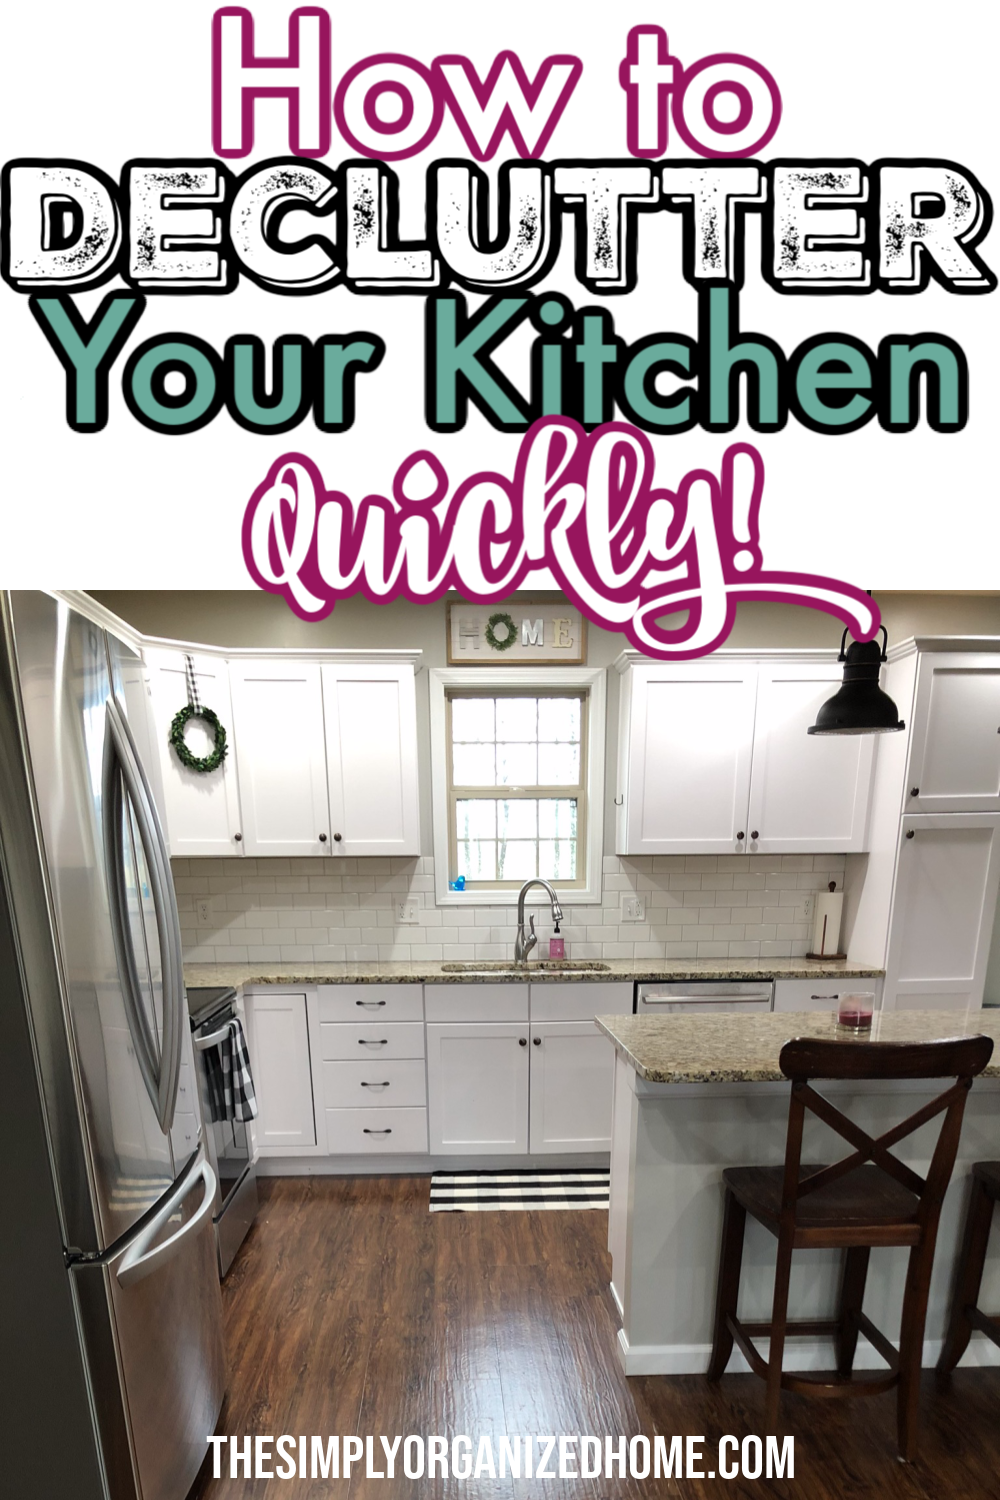 Free Up Space In Your Kitchen. Ditch The Saucepan. – Dalstrong